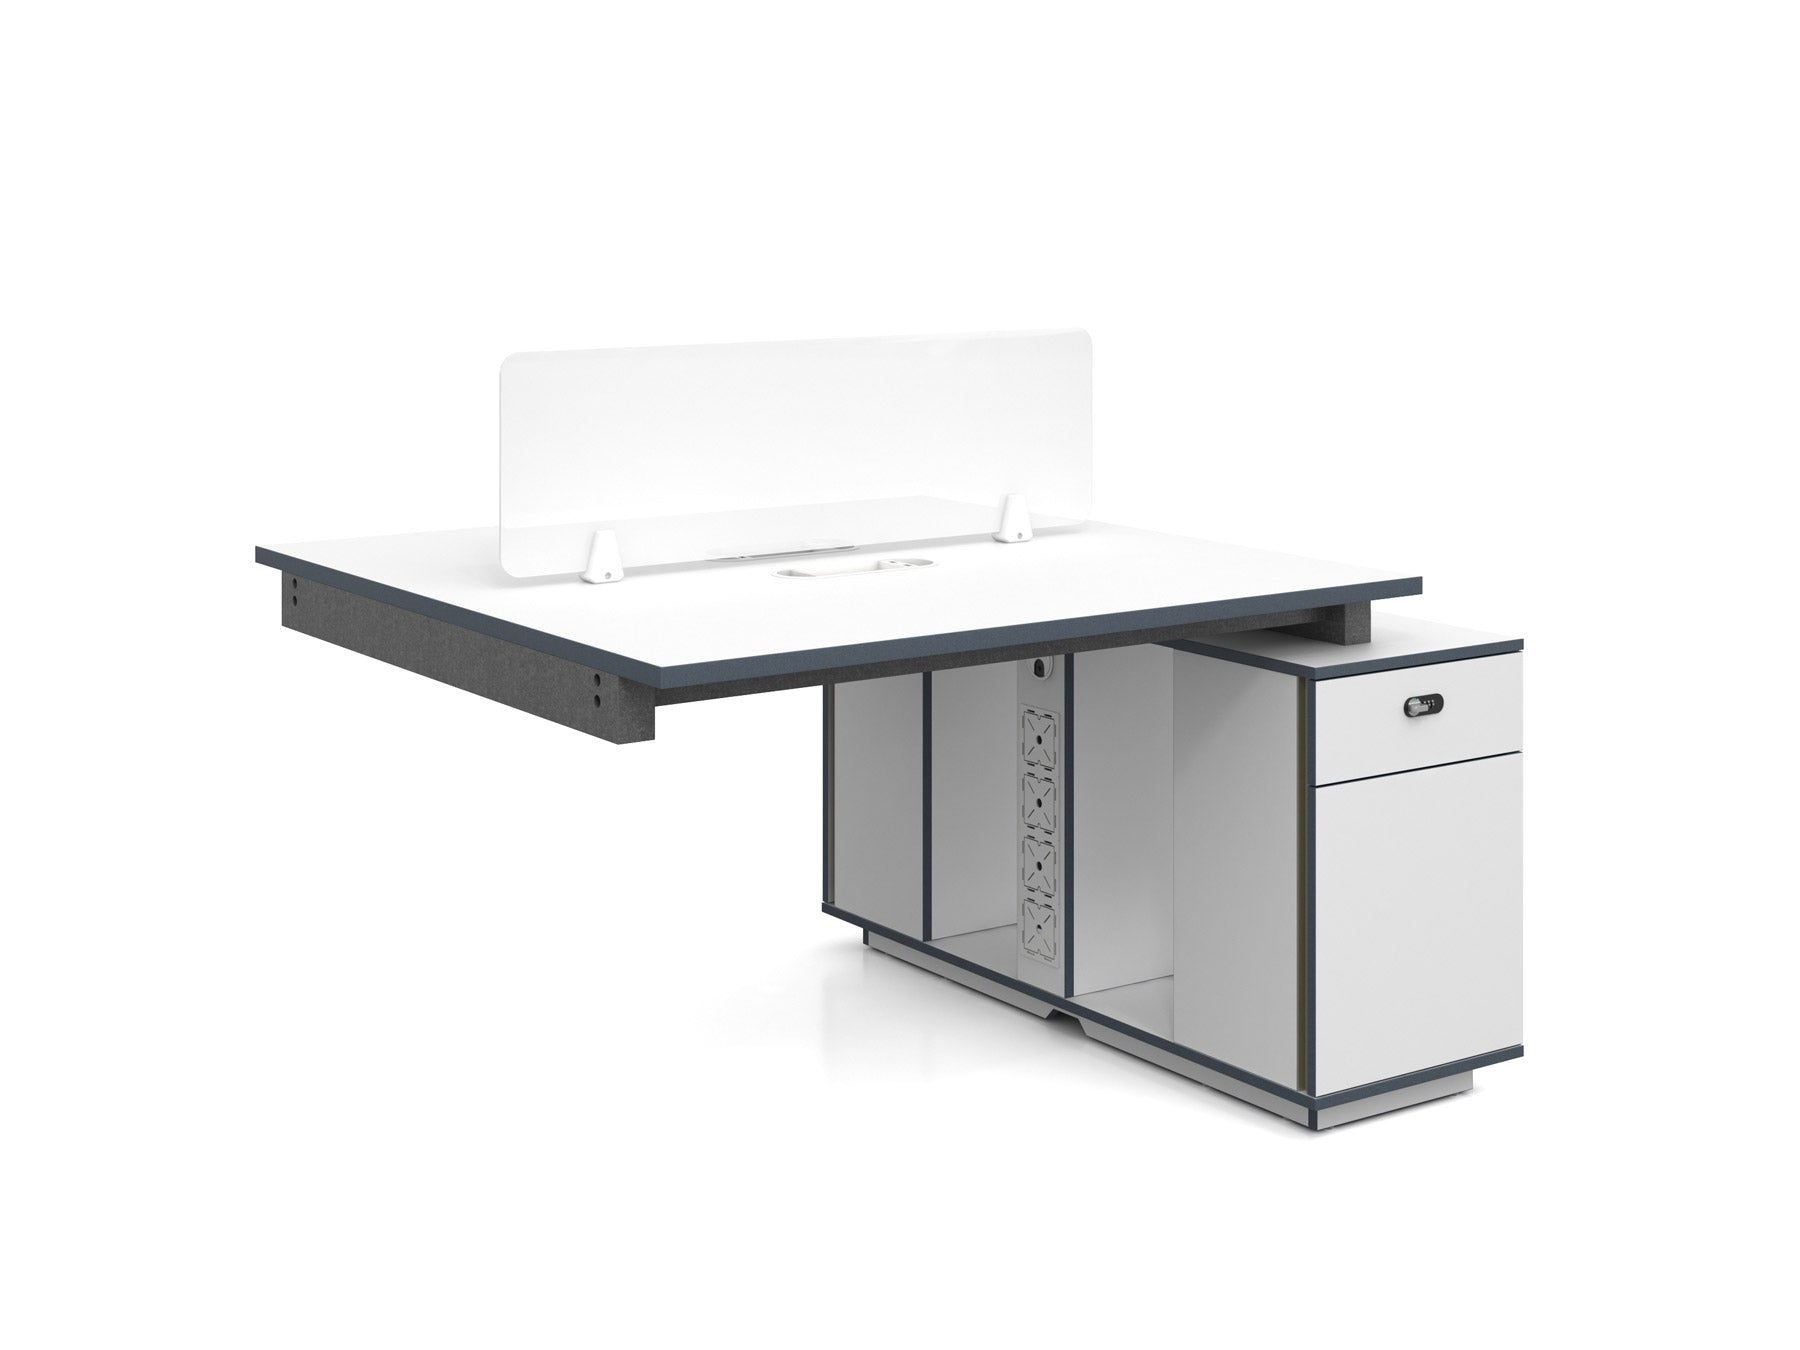 DreasyTech 4 people Workstation 2.8M Office Desk with Cabinets White